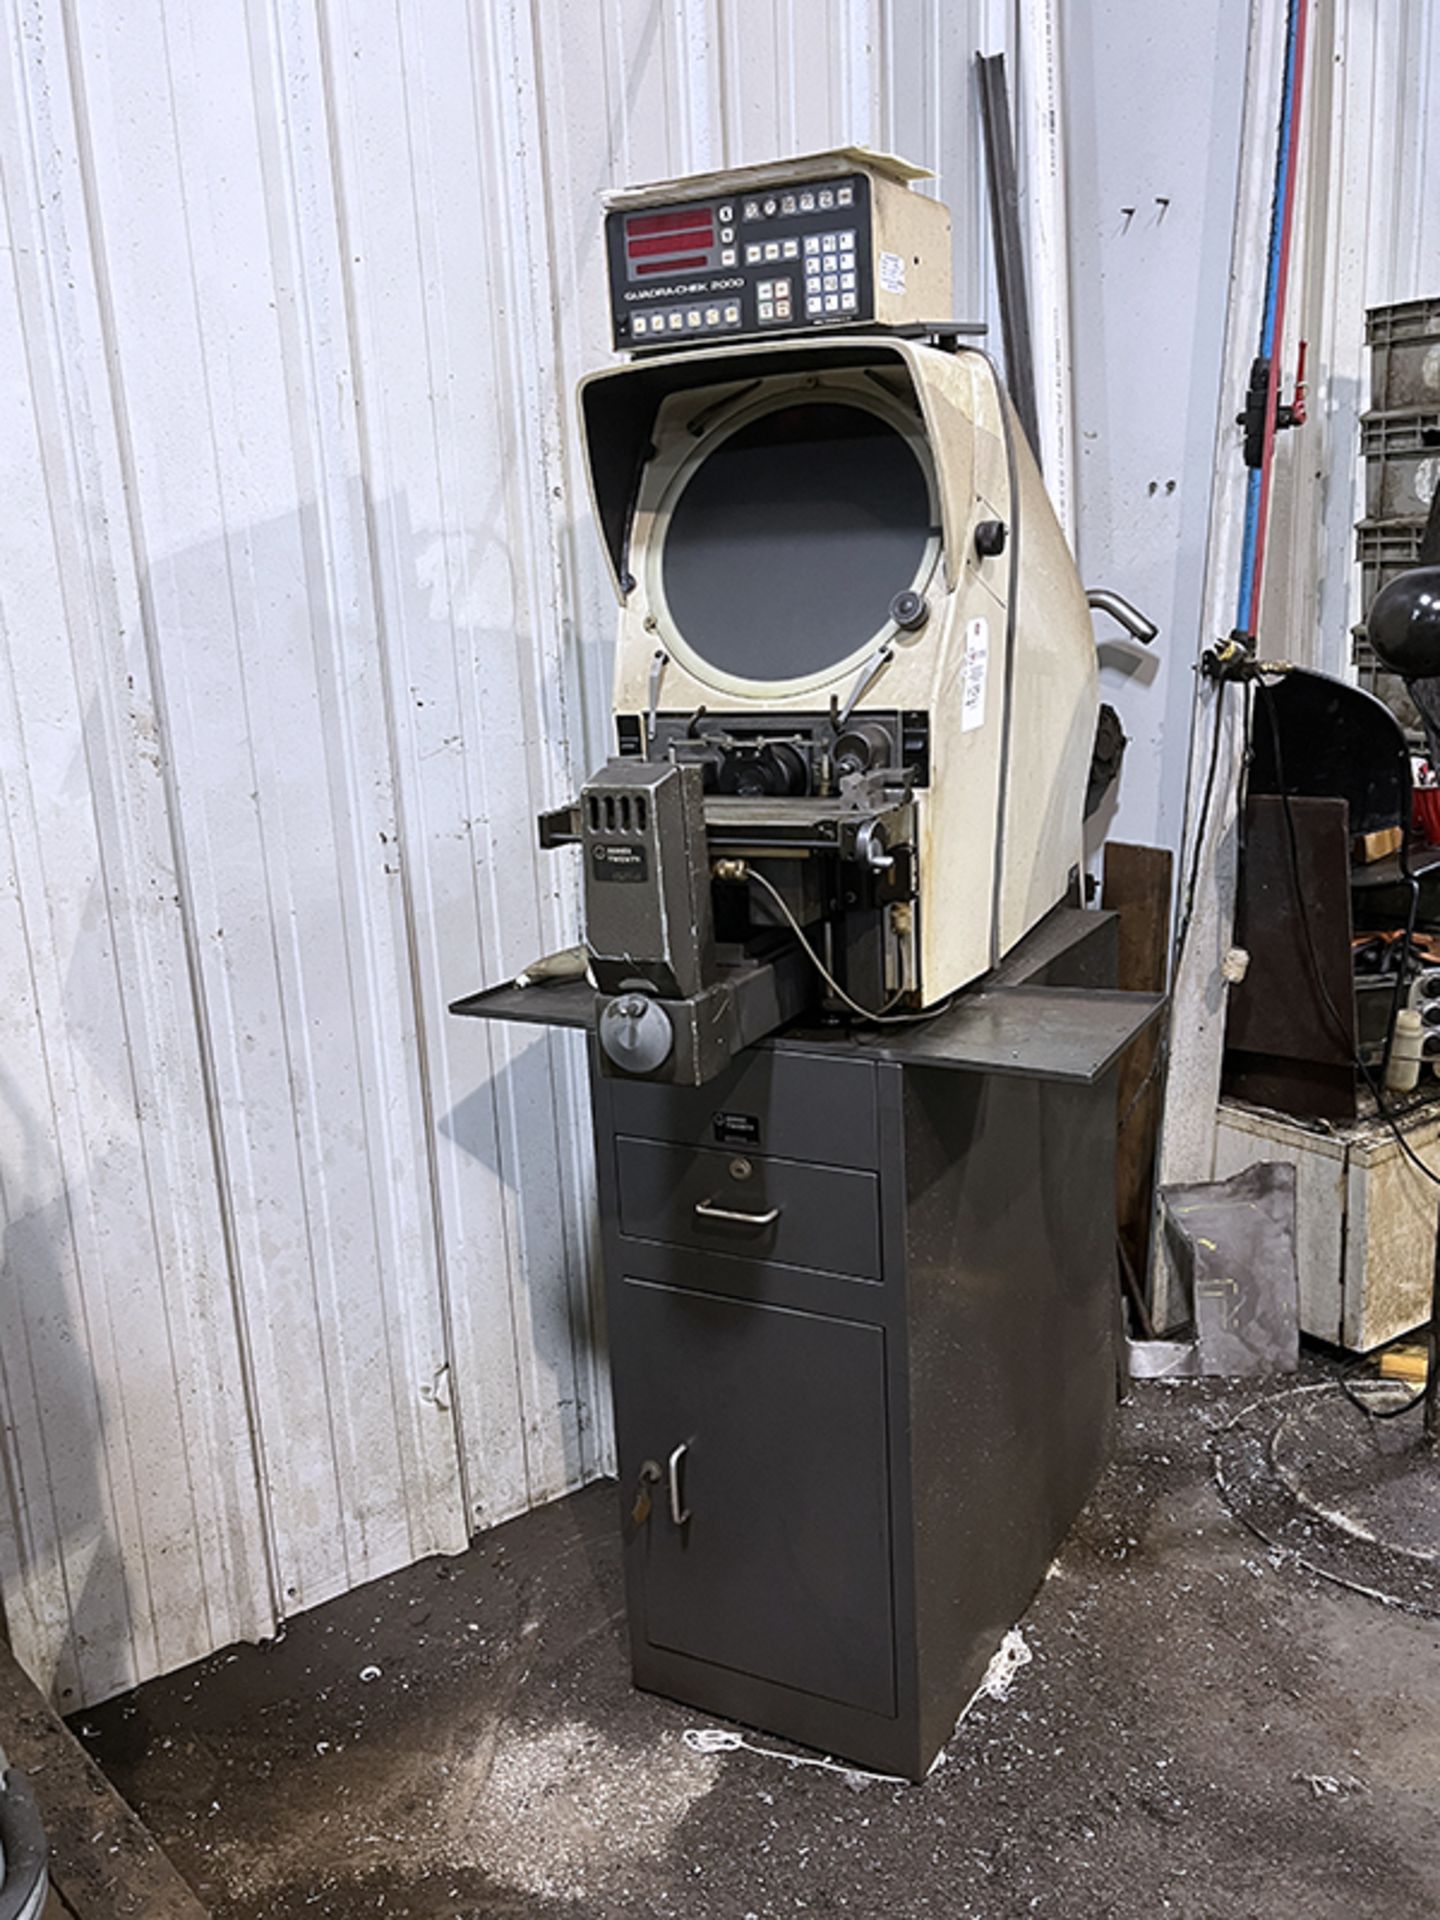 14" Gage Master Series 20 29/GM4 Optical Comparator - Image 4 of 9